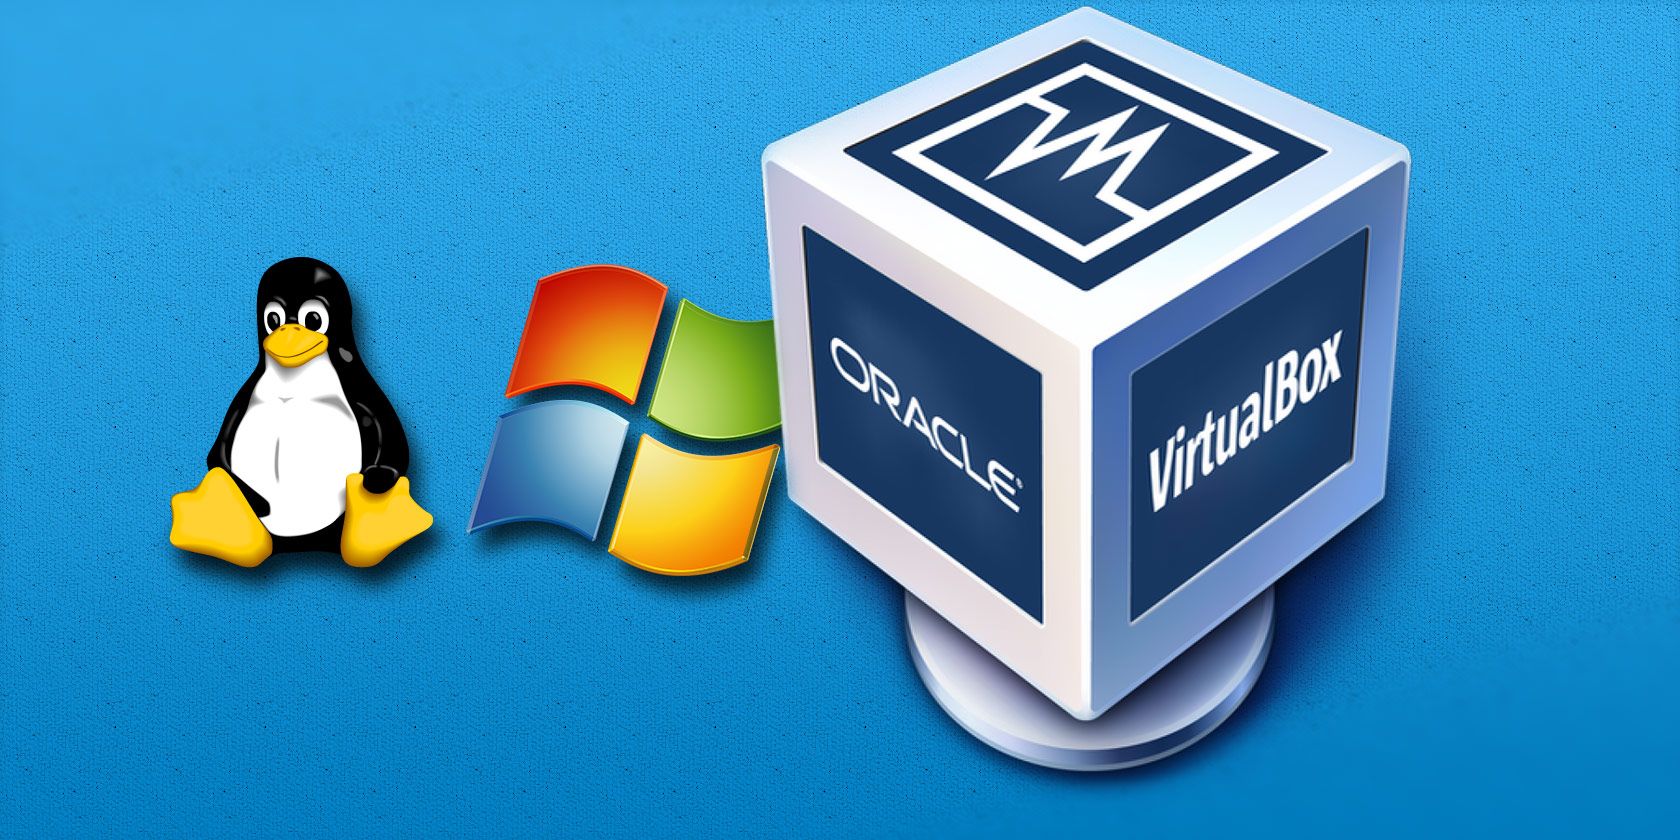 install mac os on virtualbox from disc